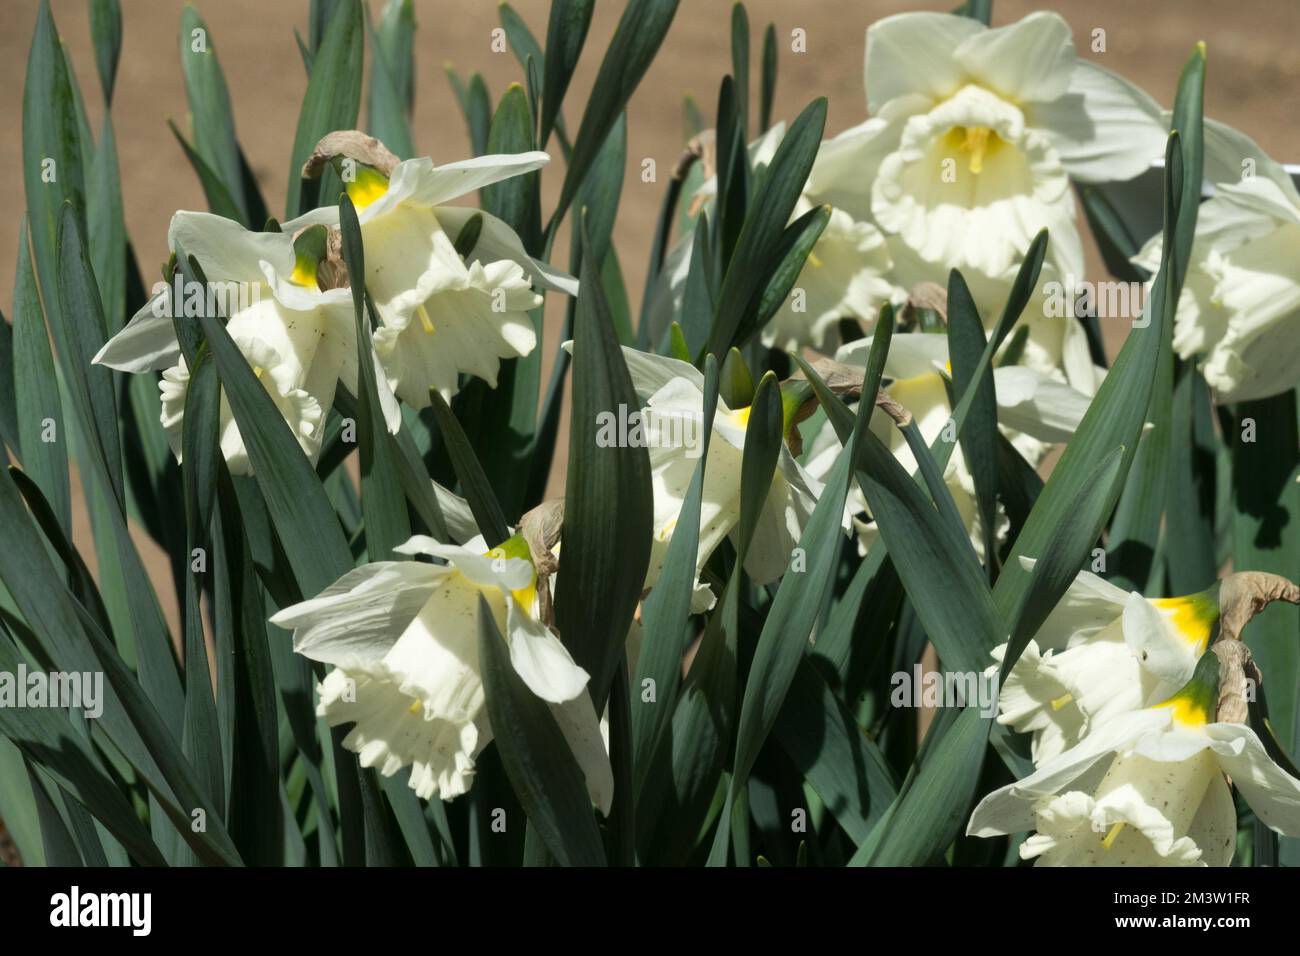 Daffodils 'Mount Hood', Narcissus 'Mount Hood', Narcissus, Daffodil, Flowering, Daffodils, White, Trumpet Daffodil, Spring, Flowers Stock Photo